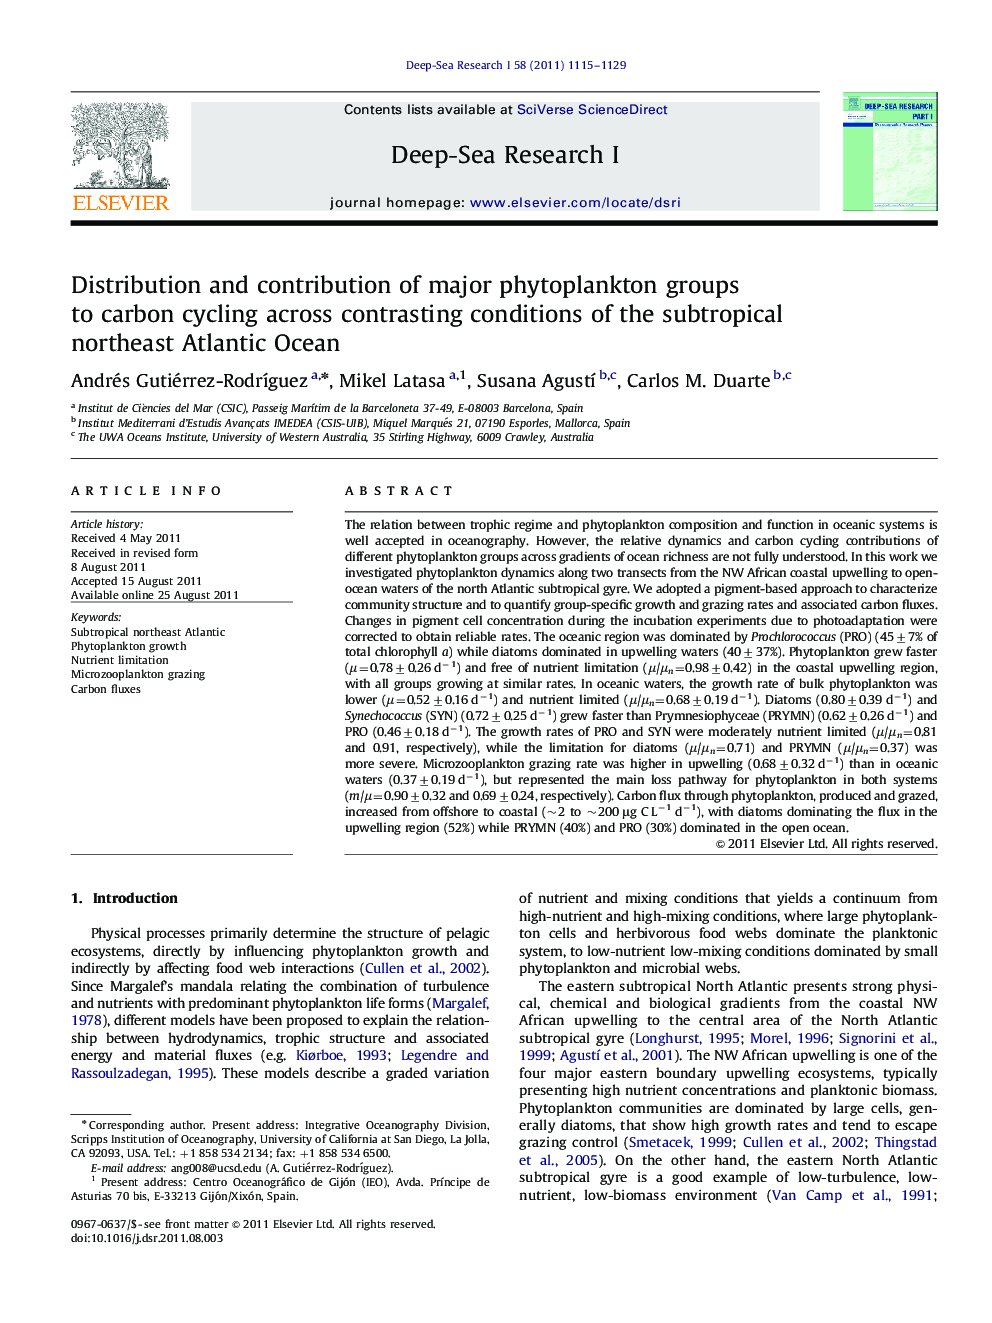 Distribution and contribution of major phytoplankton groups to carbon cycling across contrasting conditions of the subtropical northeast Atlantic Ocean